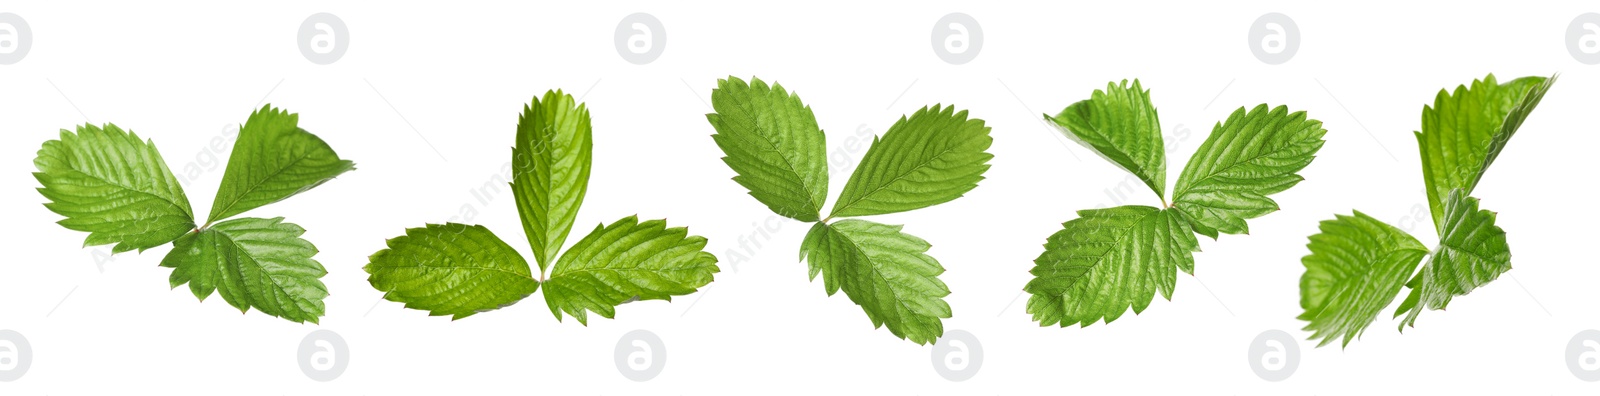 Image of Set with bright green wild strawberry leaves isolated on white